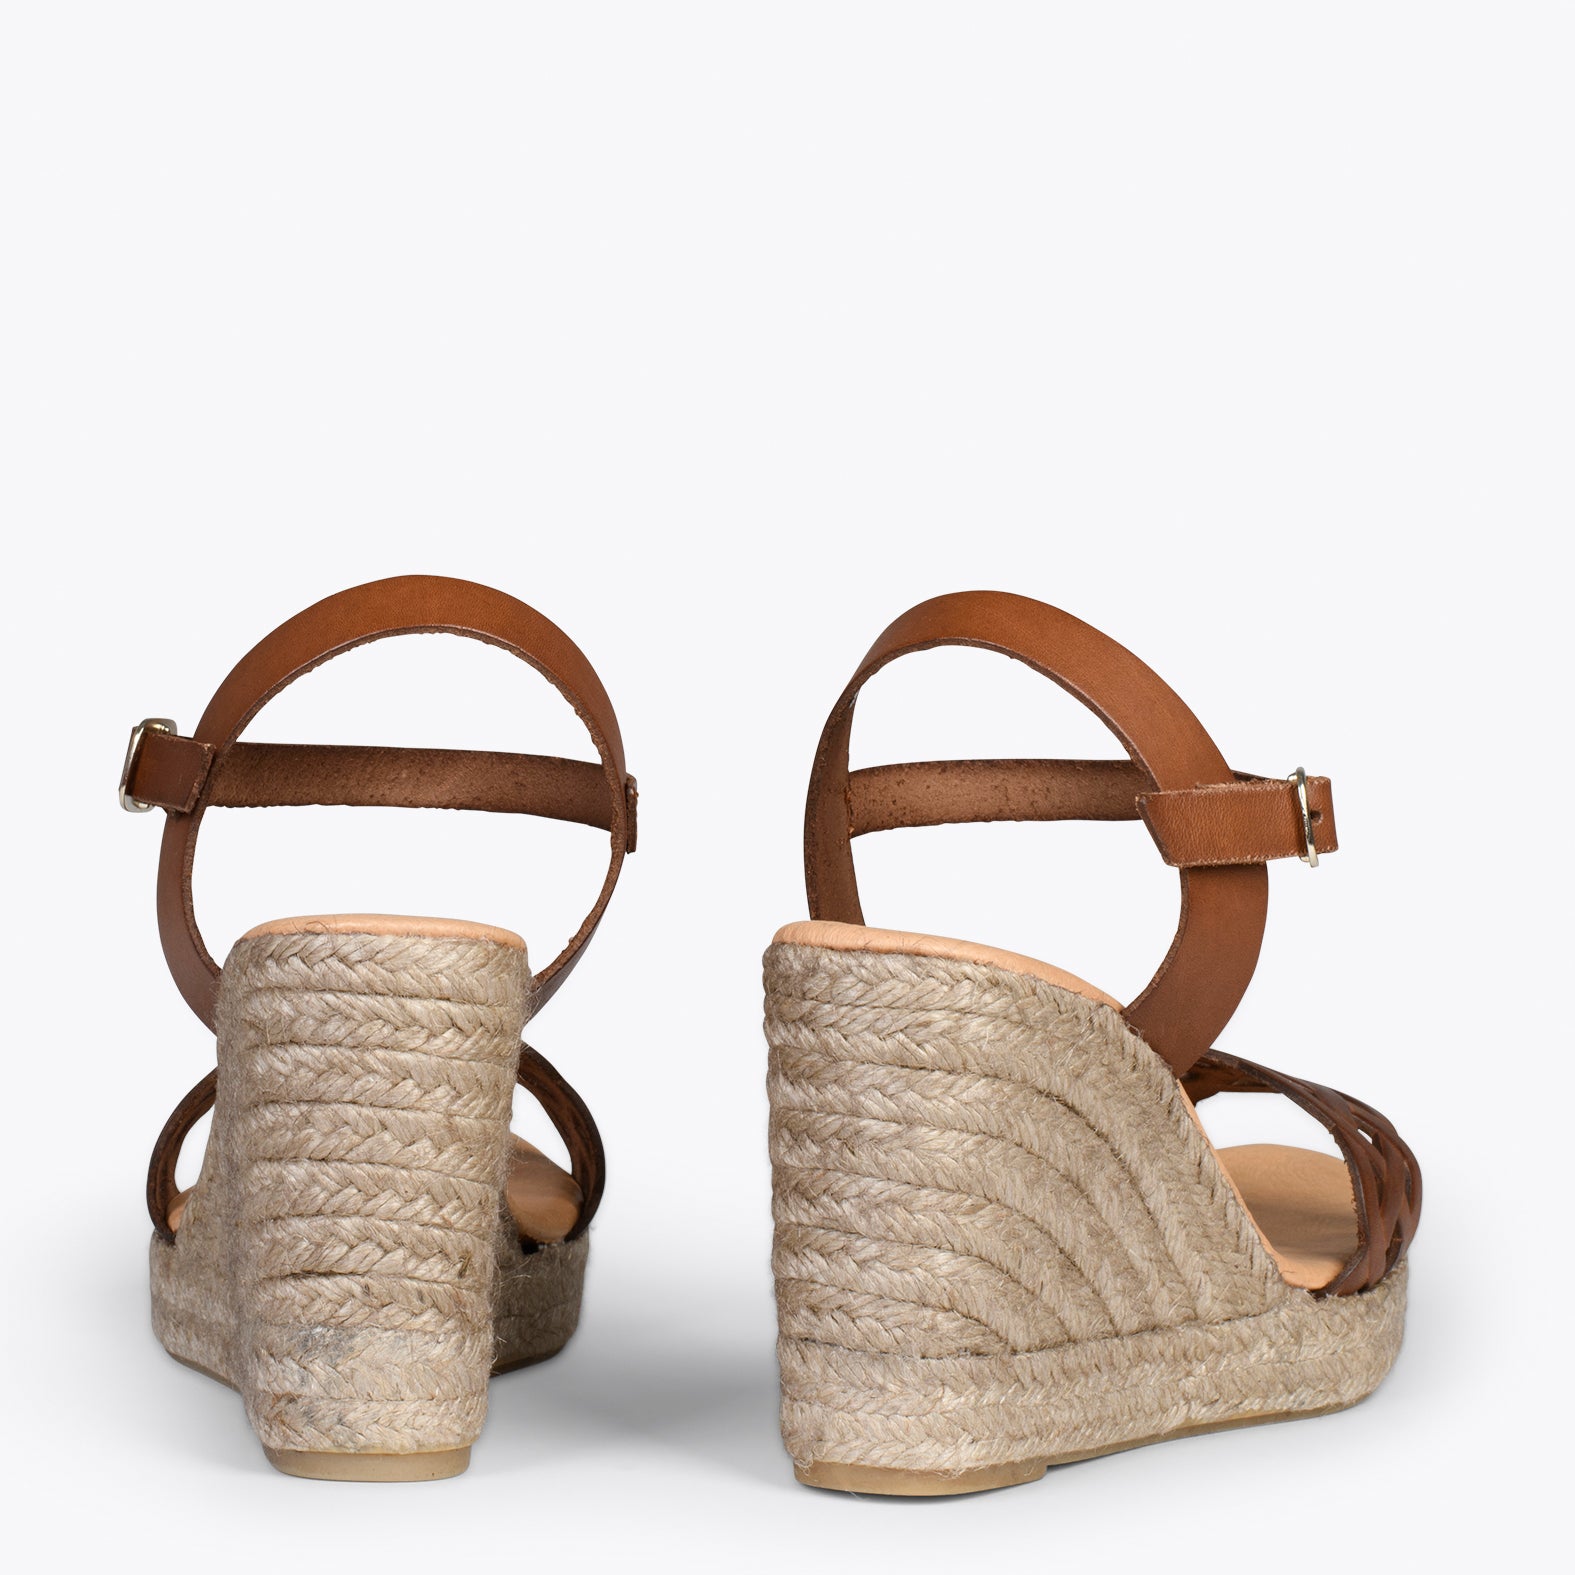 OASIS – BROWN espadrille wedges with braided front